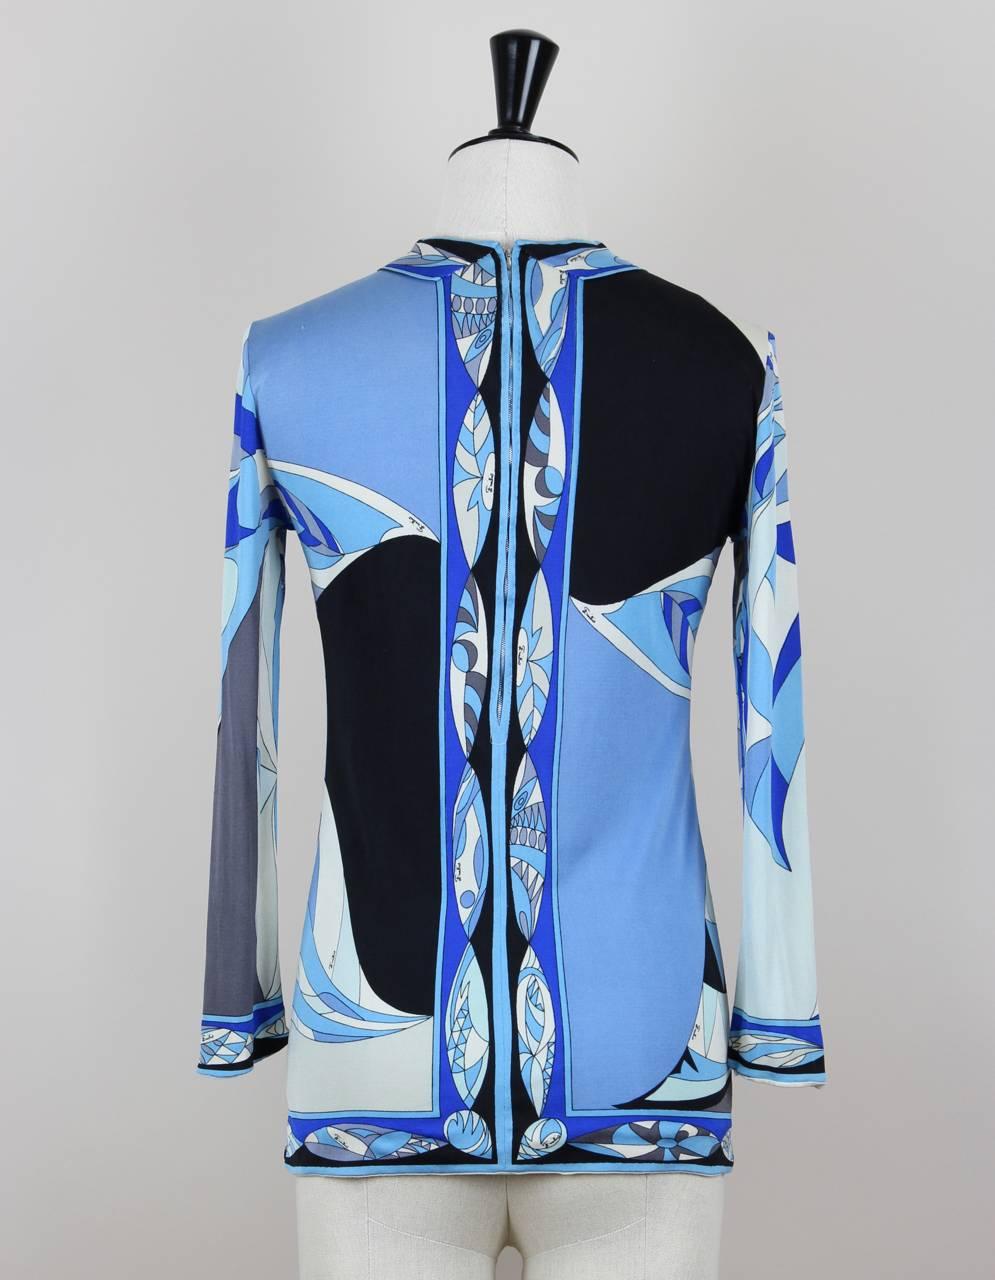 This silk jersey top features a classic Pucci geometric print in different shades of blue, white, gray and black. The top shows a round neck, long narrow sleeves and a 32 cm - 12.6